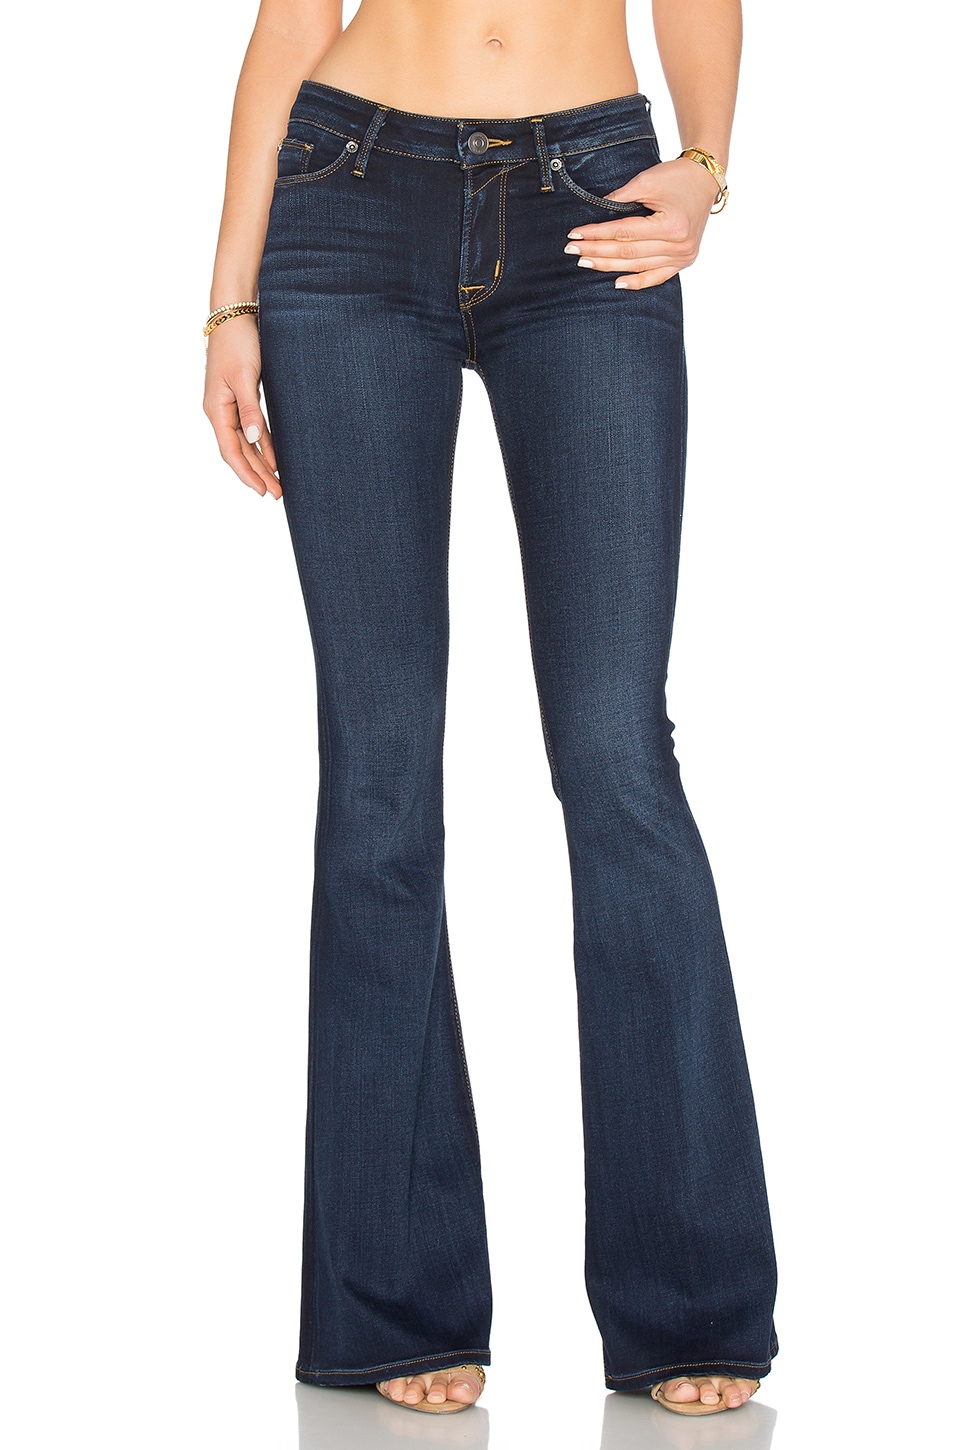 Hudson Jeans Mia 5 Pocket Mid Rise Flare in Oracle | REVOLVE